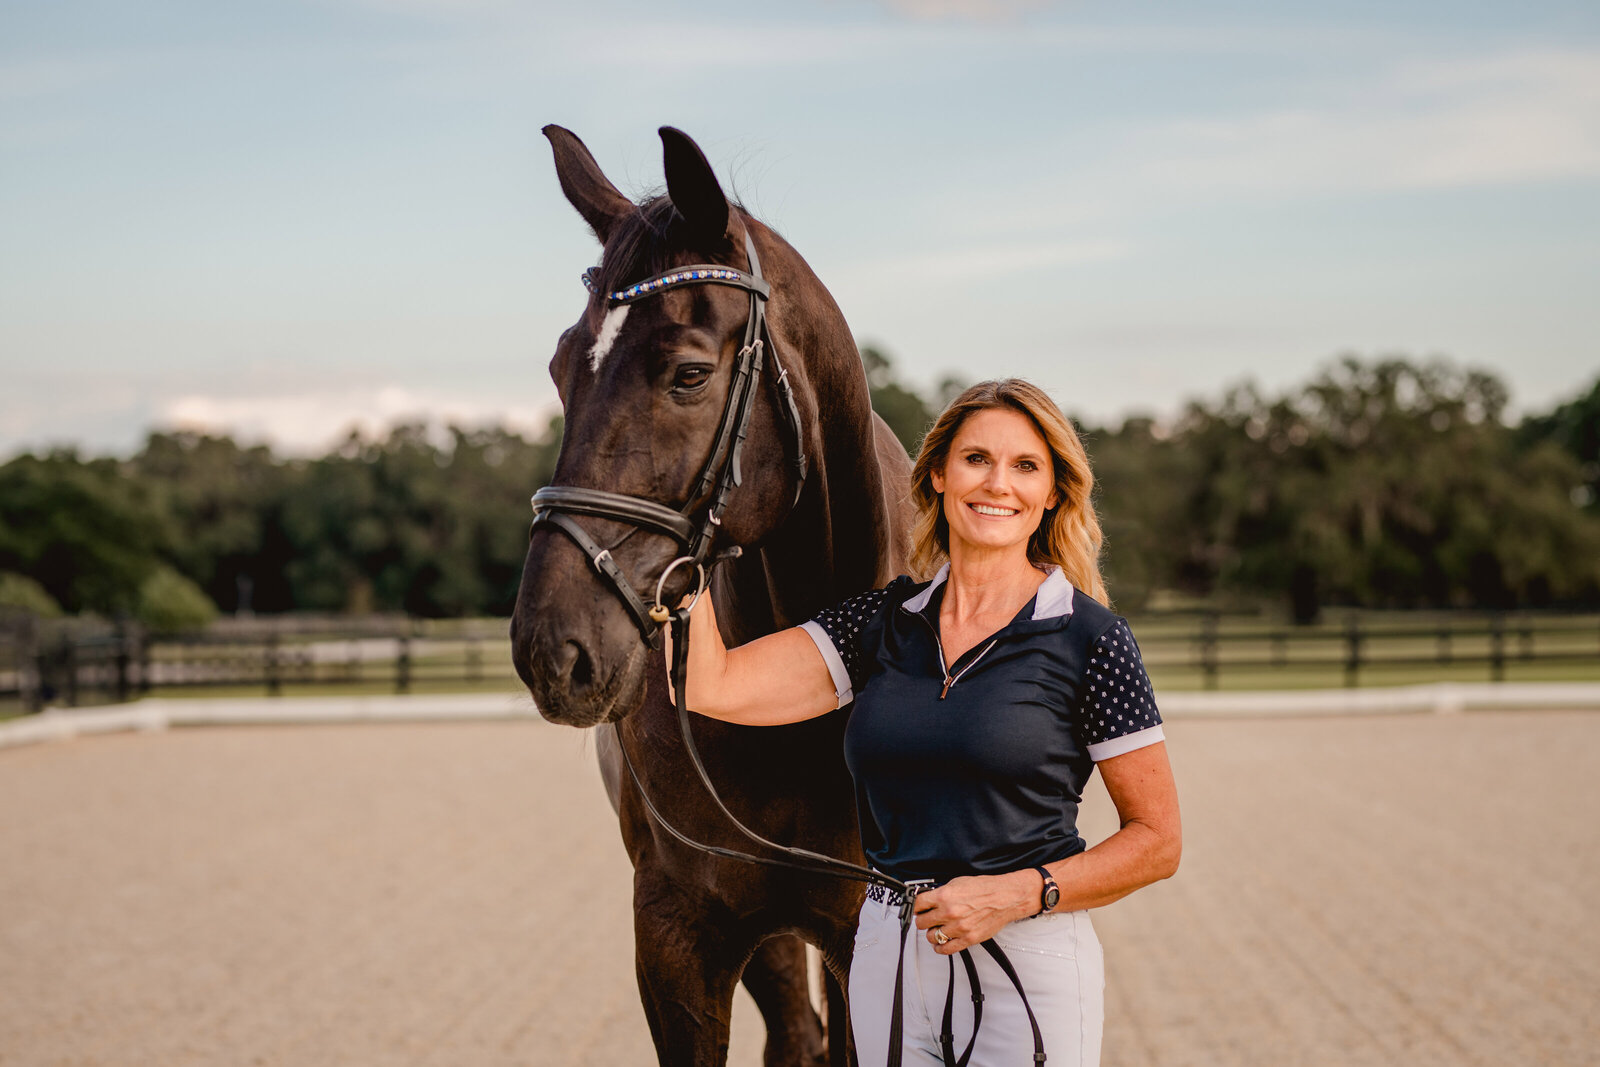 Dressage horse and rider portraits taken by Ocala horse photographer.